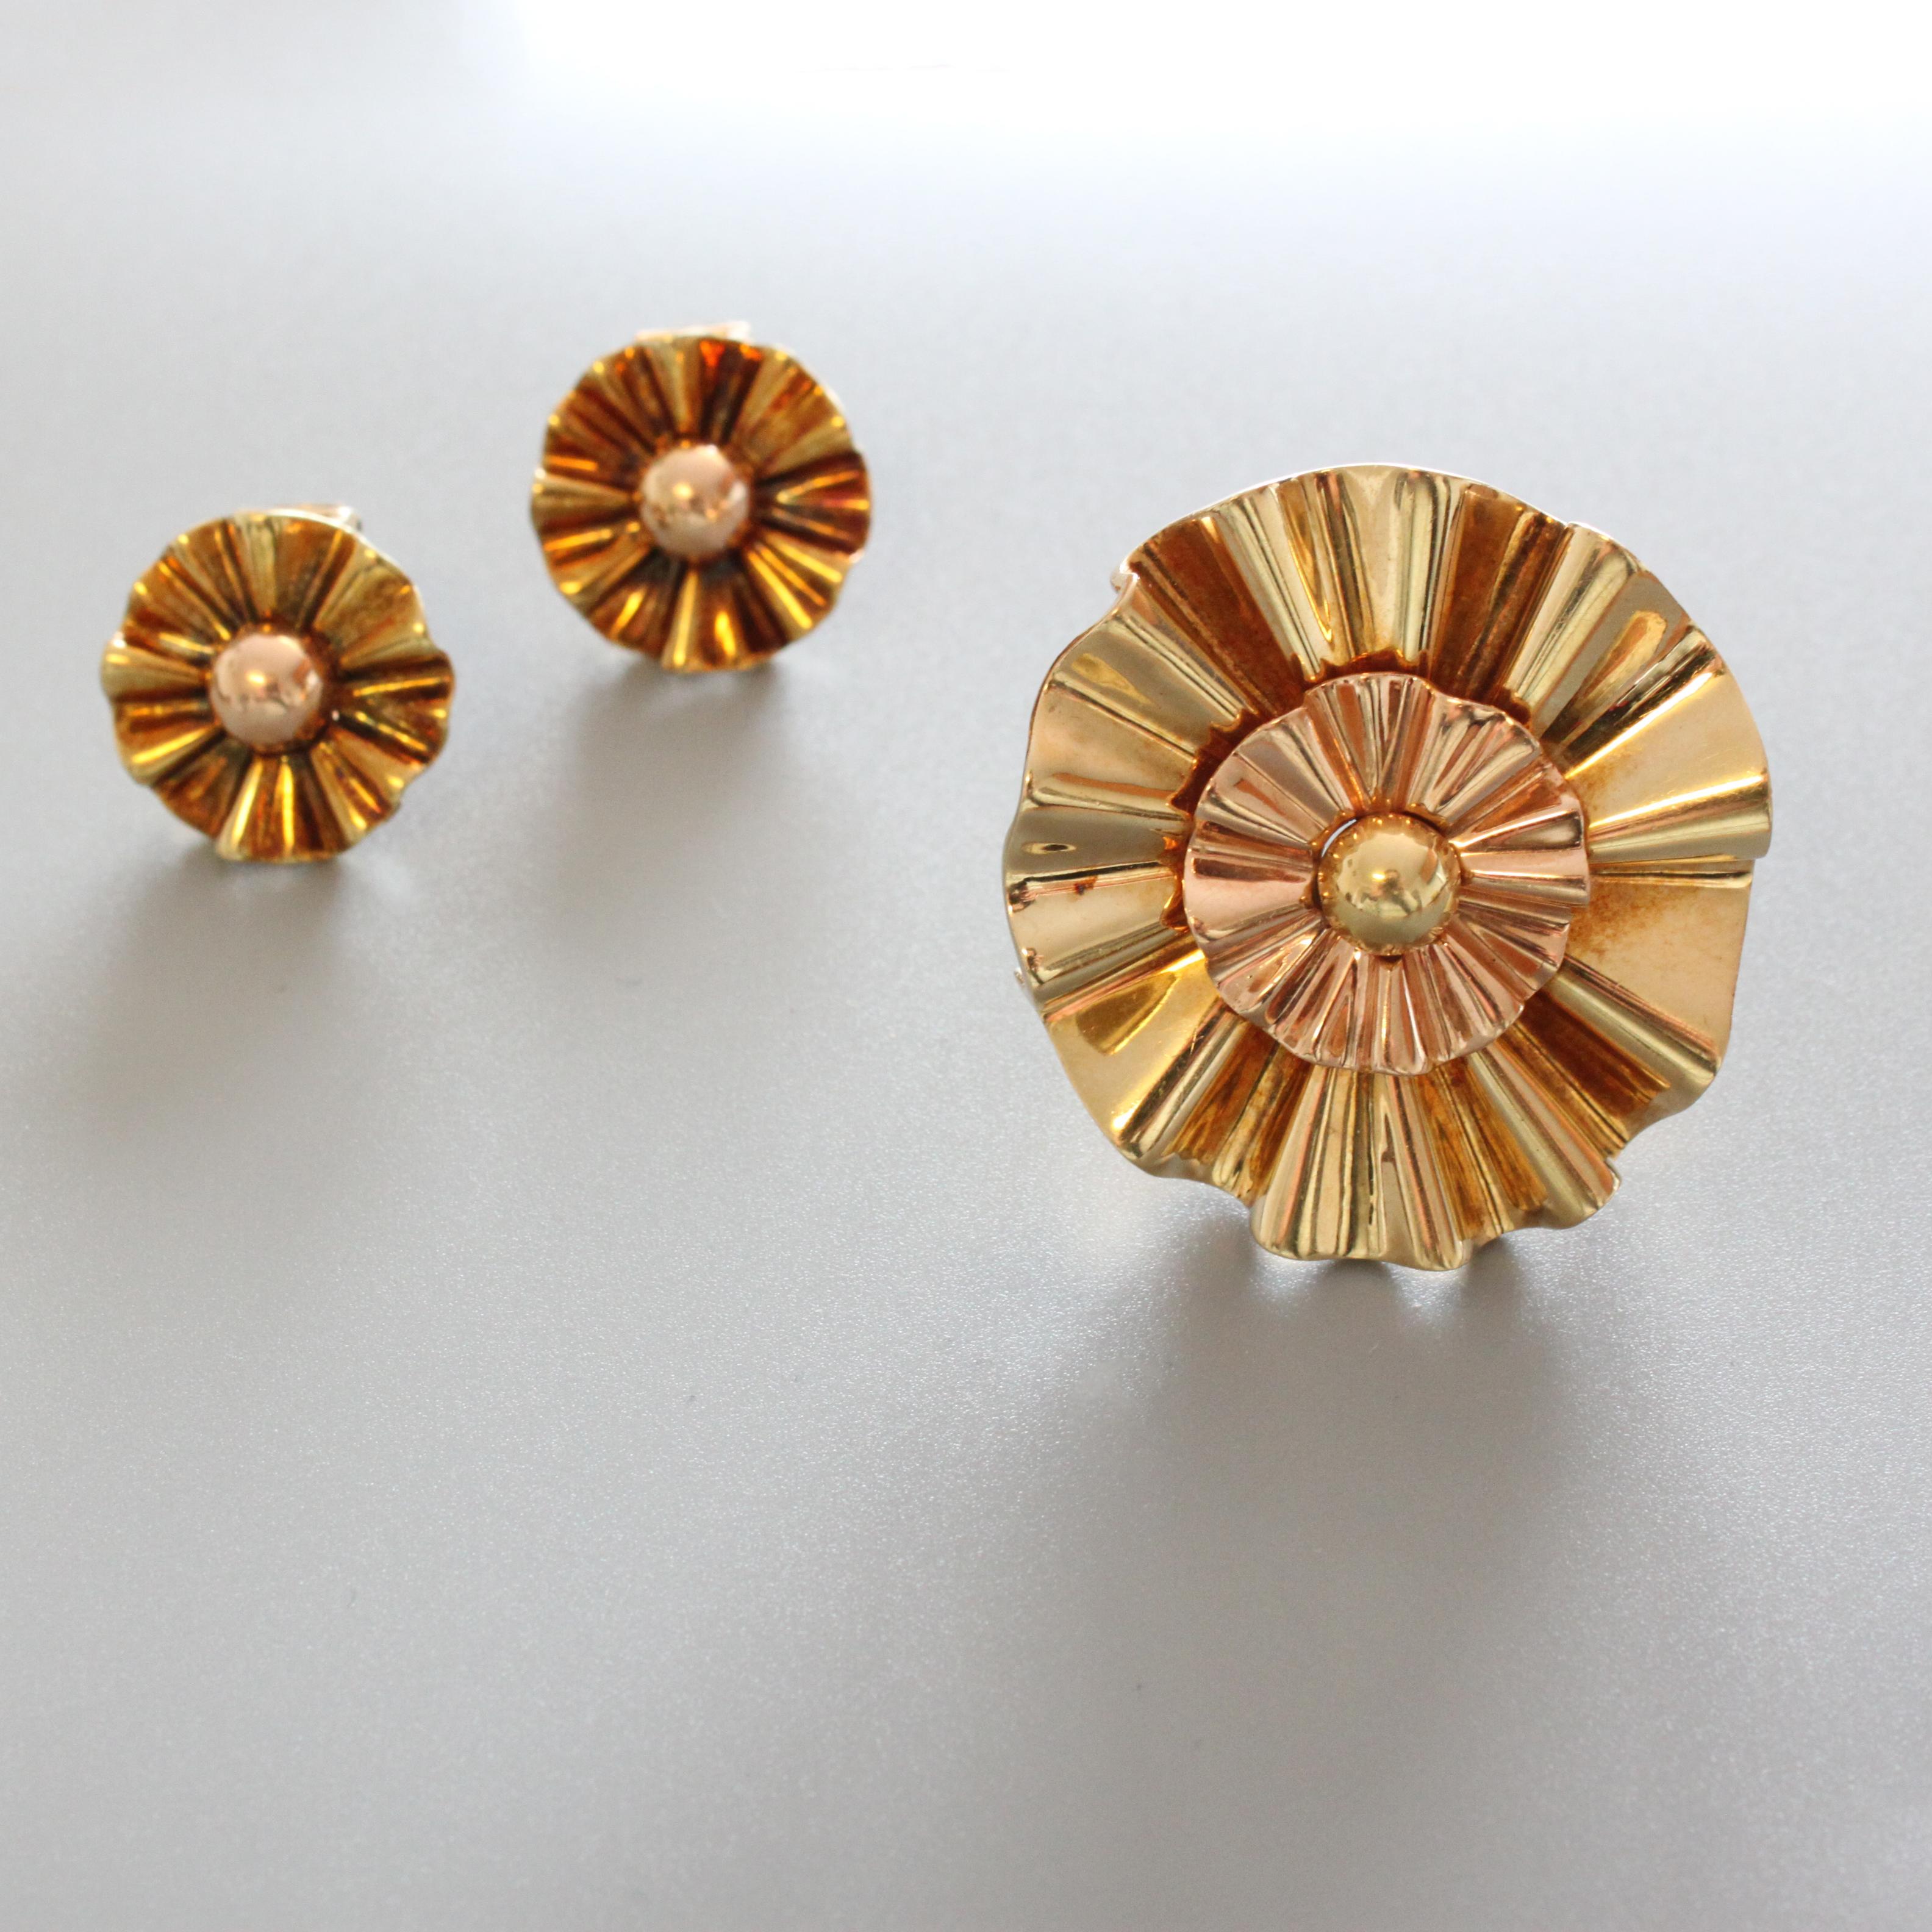 Mauboussin Trabert & Hoeffer Reflection Gold Earclips and Brooch Set circa 1940s For Sale 5